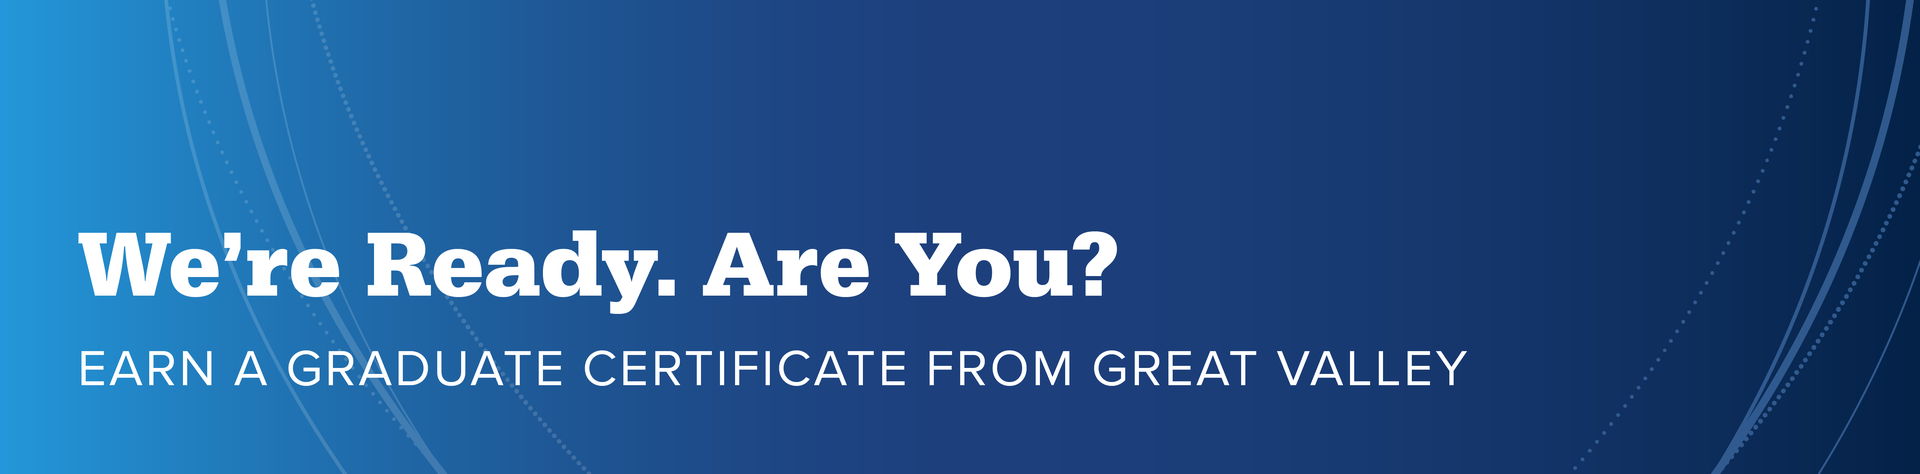 Header with text "We're Ready. Are You? Earn a Graduate Certificate from Great Valley